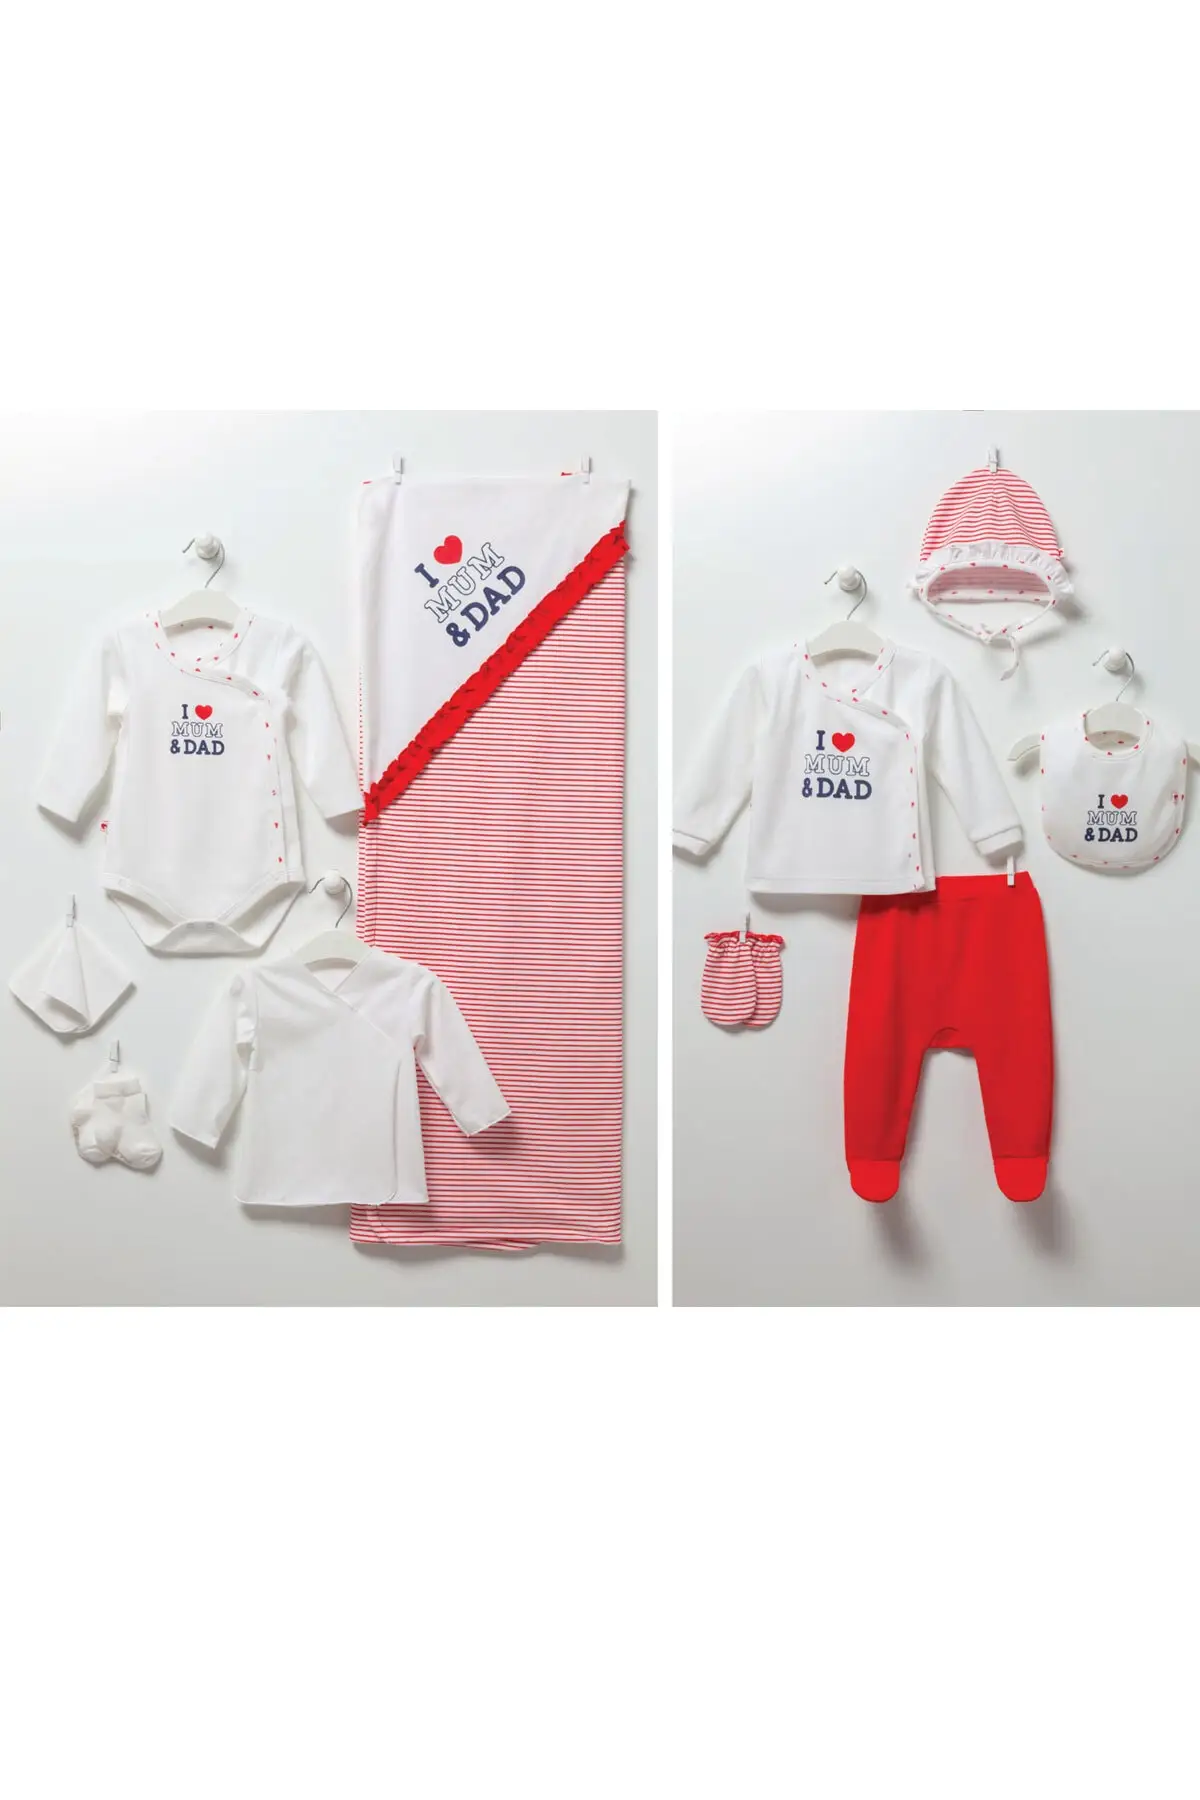 

Baby girl Red I Love Mum & dad 10lu Hospital Output Set Striped Cotton 10'lu Outs Apparel